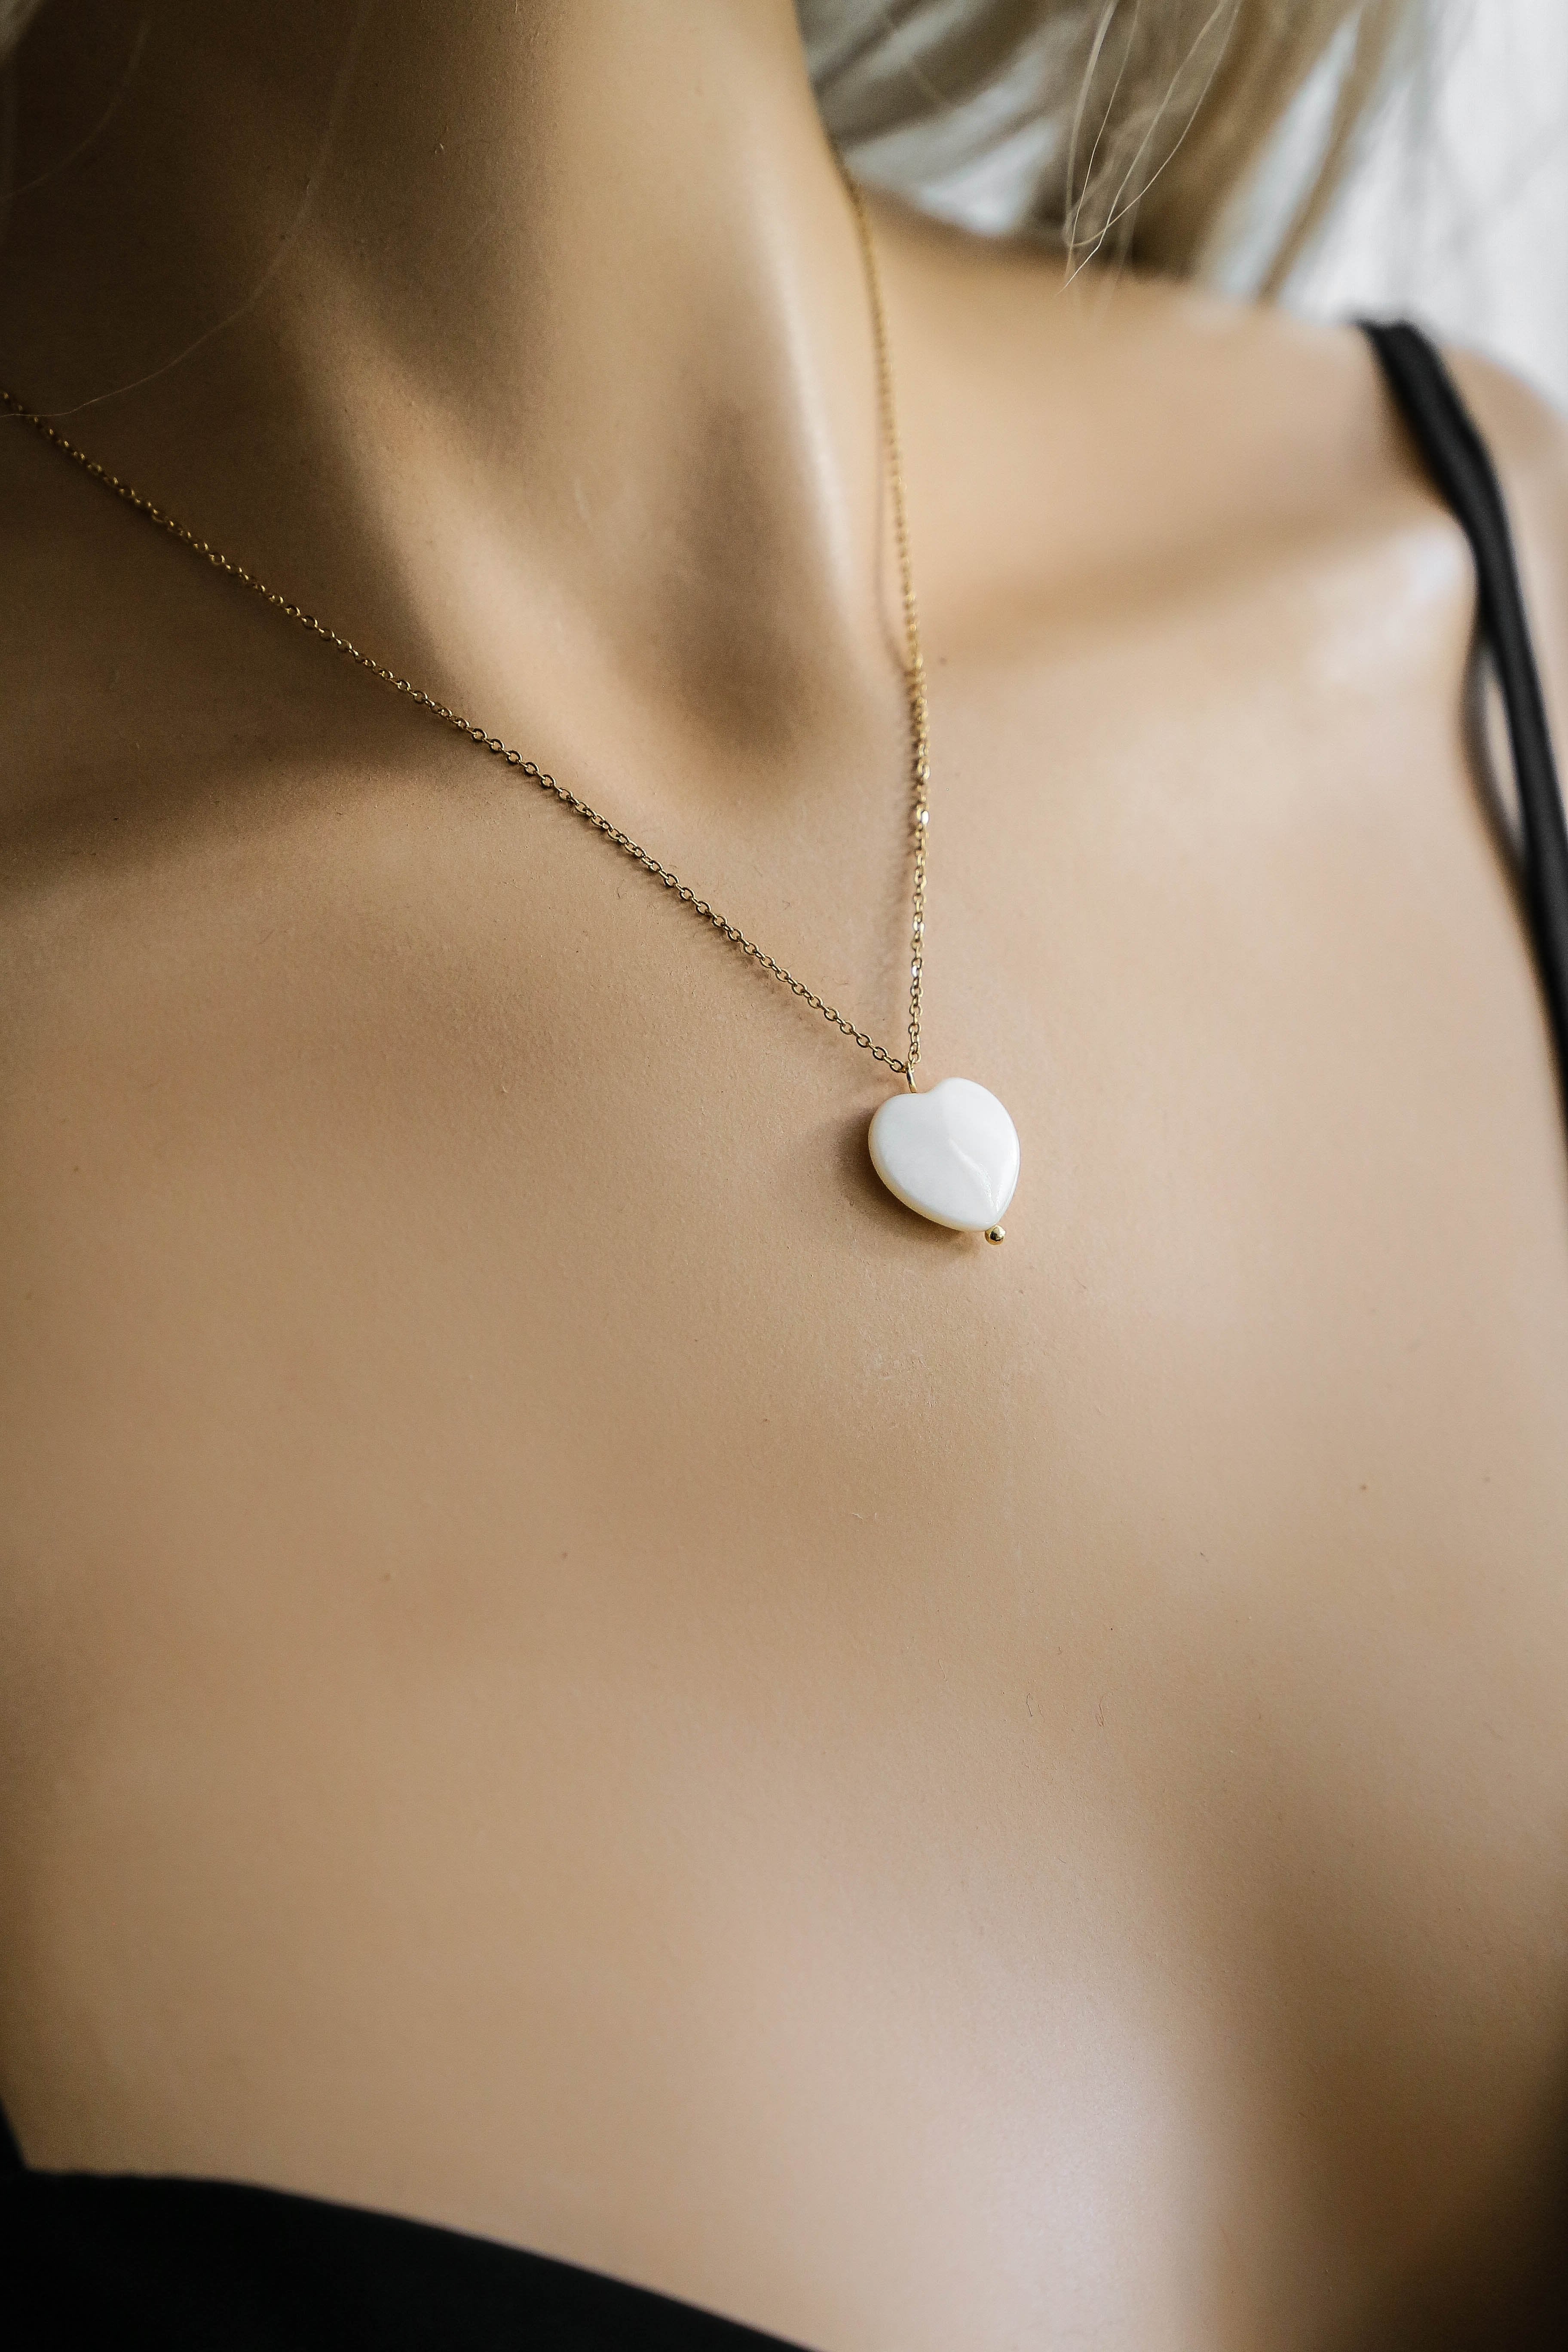 Emmeline Heart Necklace - Boutique Minimaliste has waterproof, durable, elegant and vintage inspired jewelry